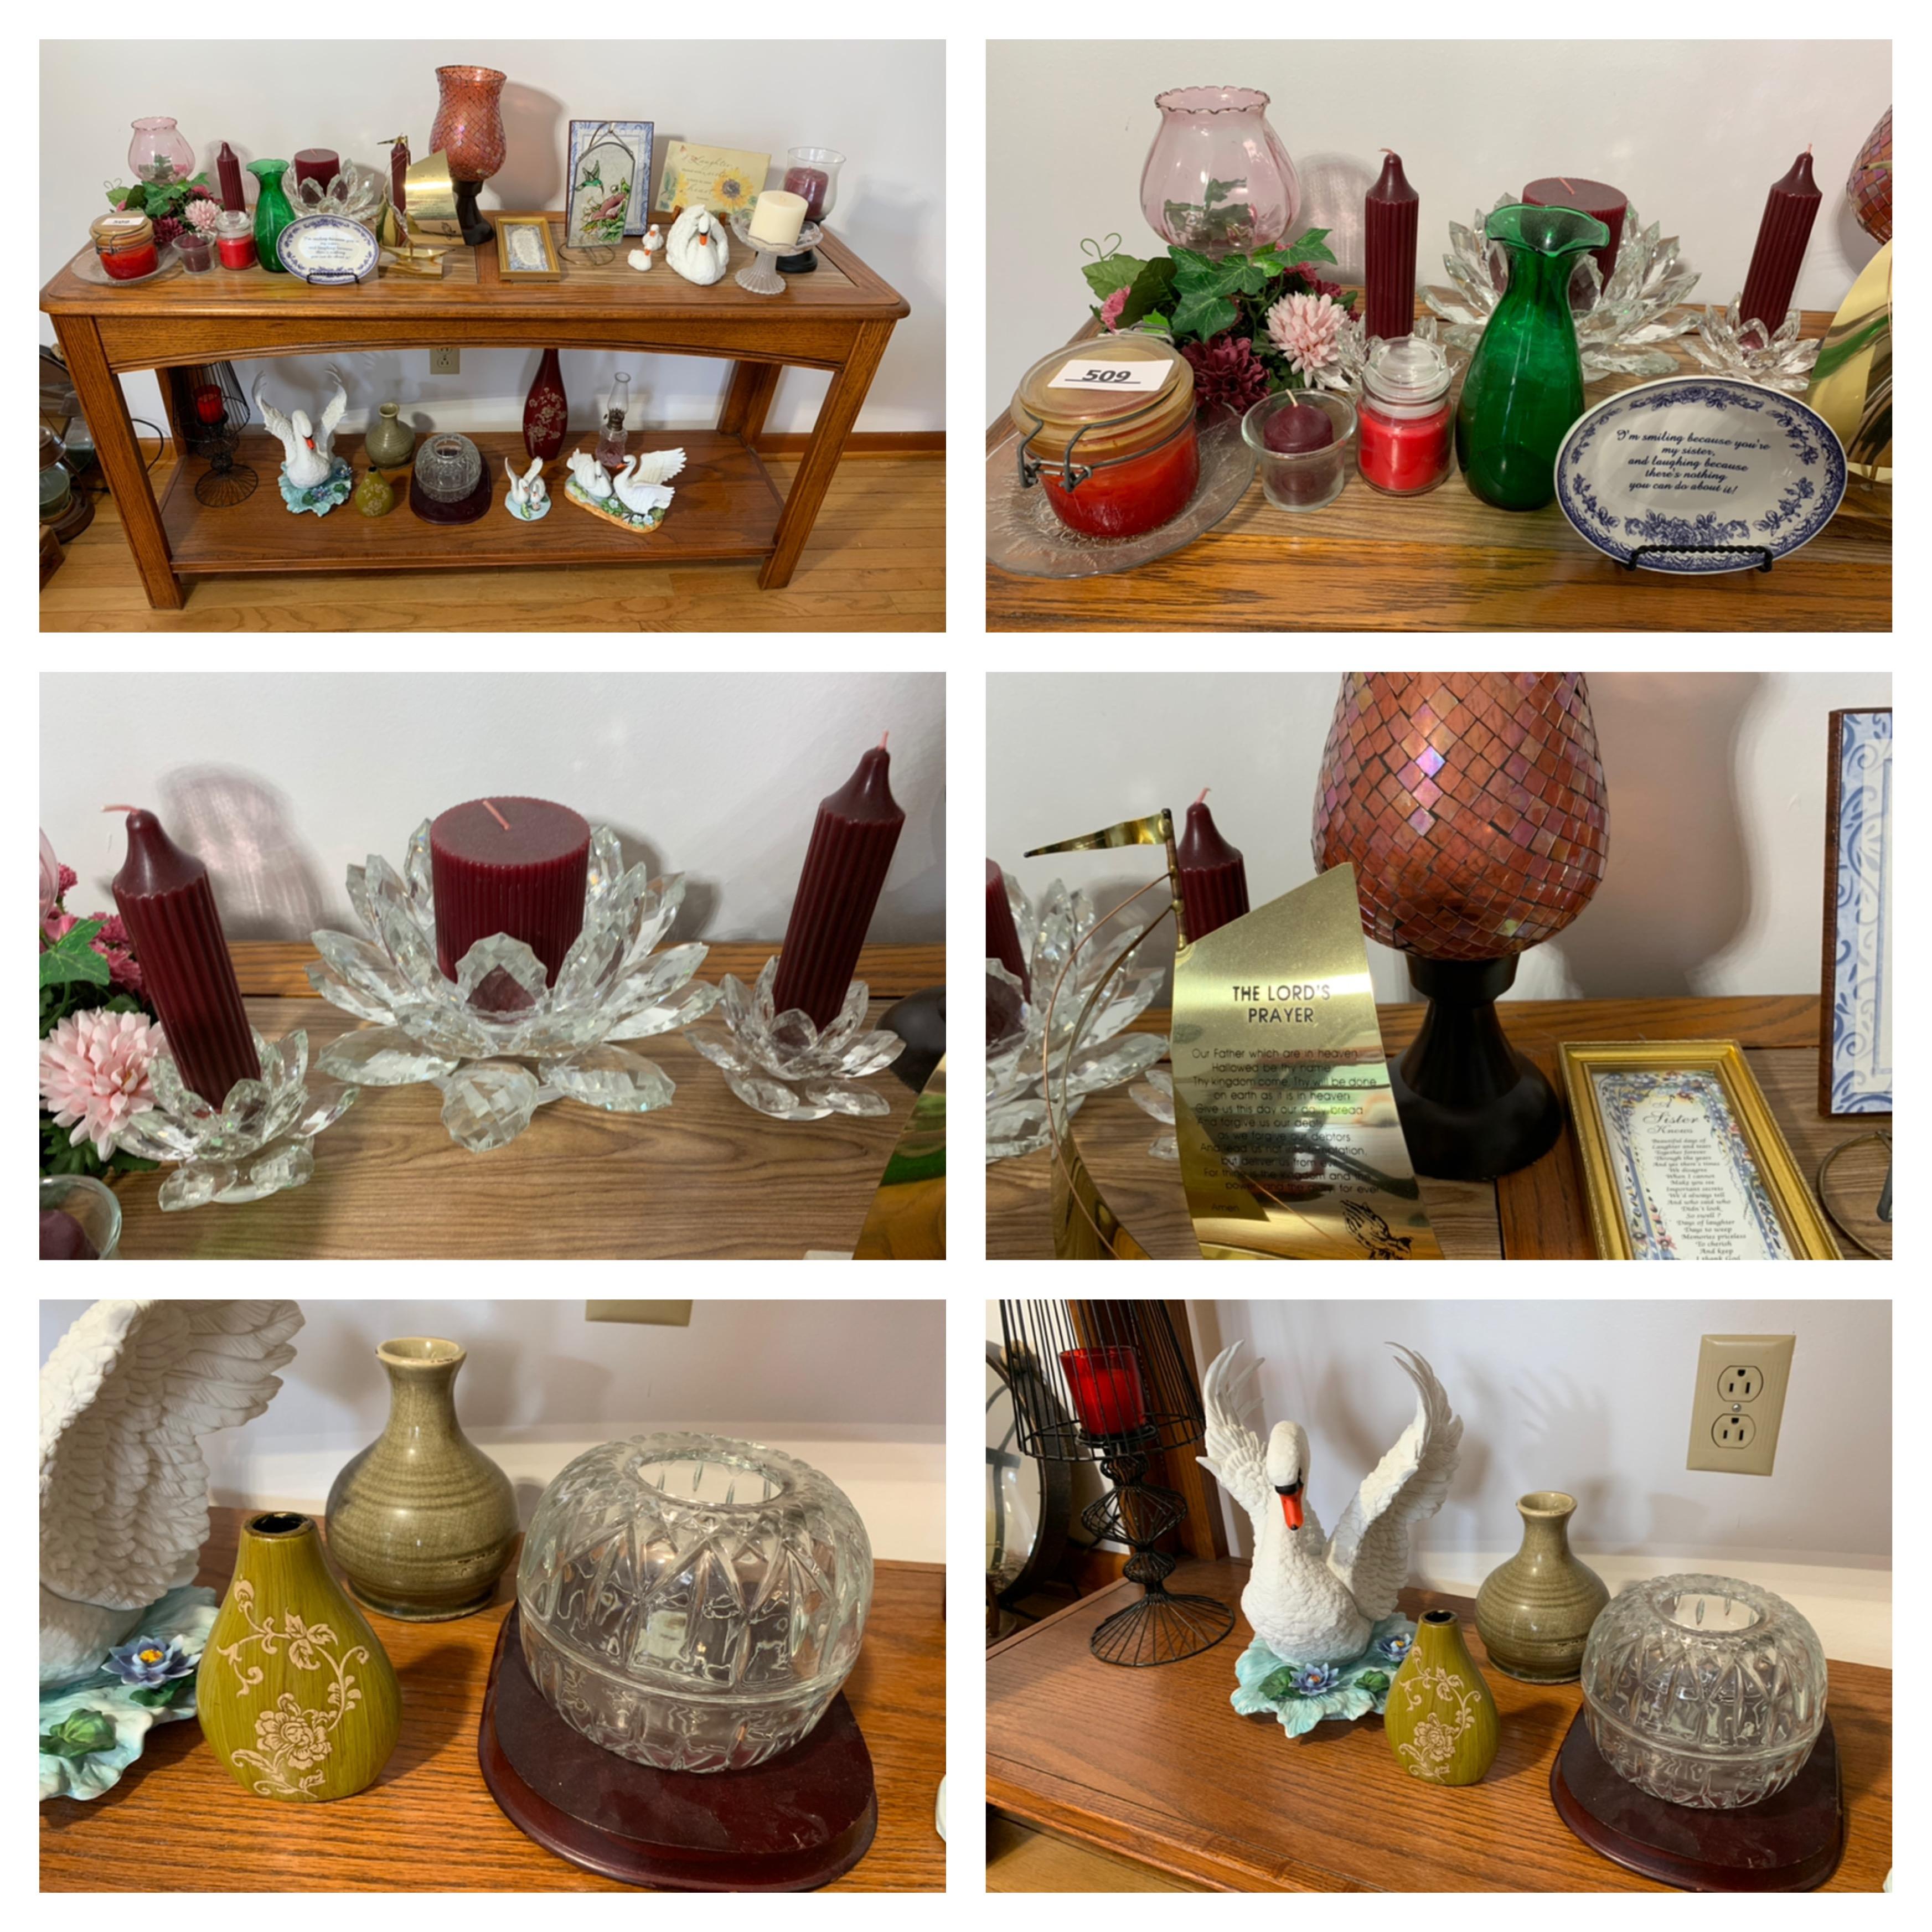 Console Table & Contents - Candles, Home Interior, Glassware & More